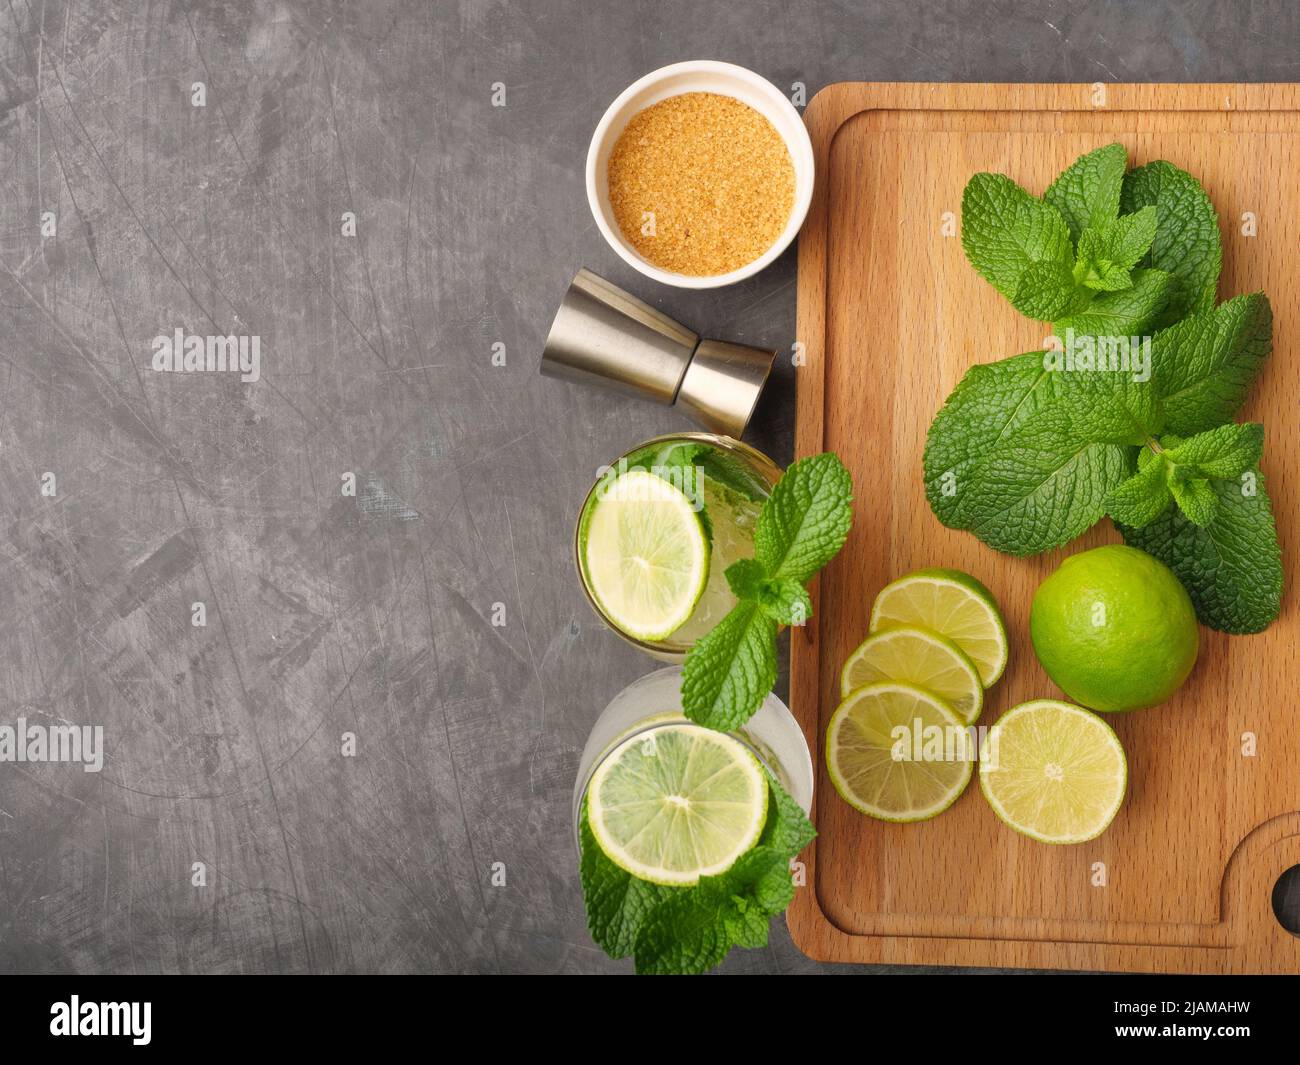 Mojito or virgin mojito long rum drink with fresh mint, lime juice, cane sugar and soda. Stock Photo